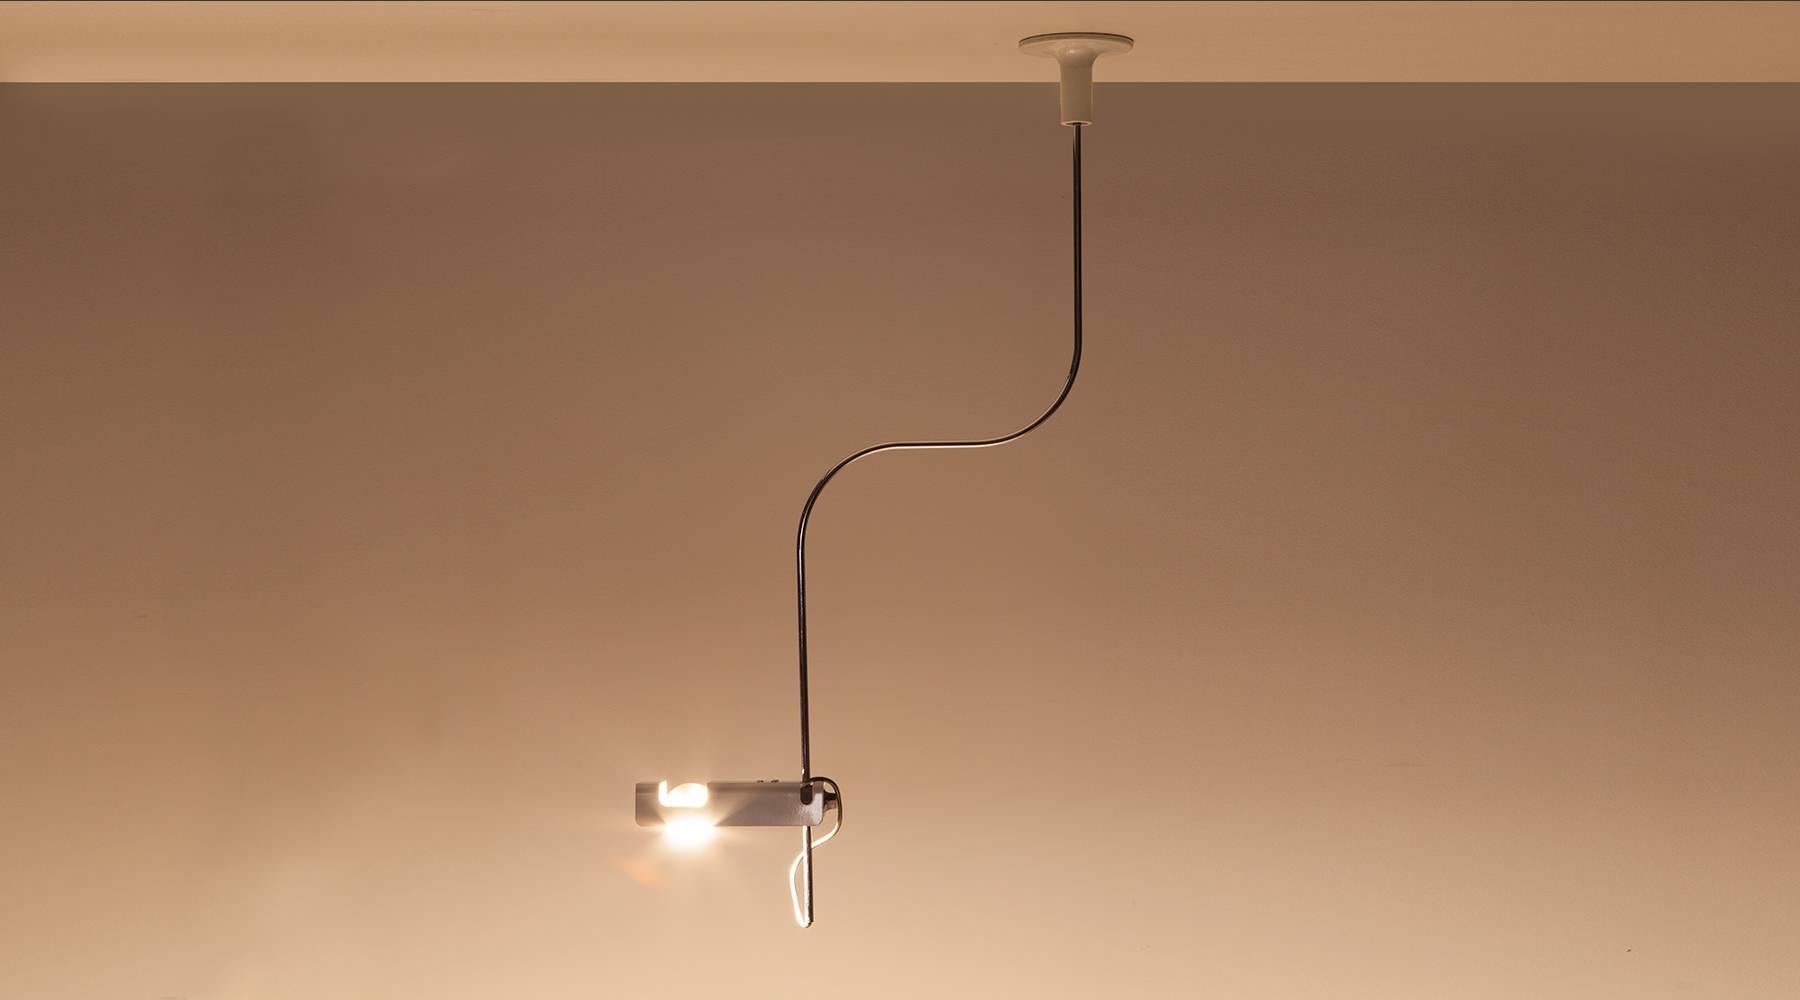 This filegree and versatile ceiling lamp was designed by Joe Colombo in 1967. It is made from white lacquered, chromium plated steel and metal. The lamp is adjustable to the shade and can be fixed to the ceiling. Manufactured by O-Luce. 

The